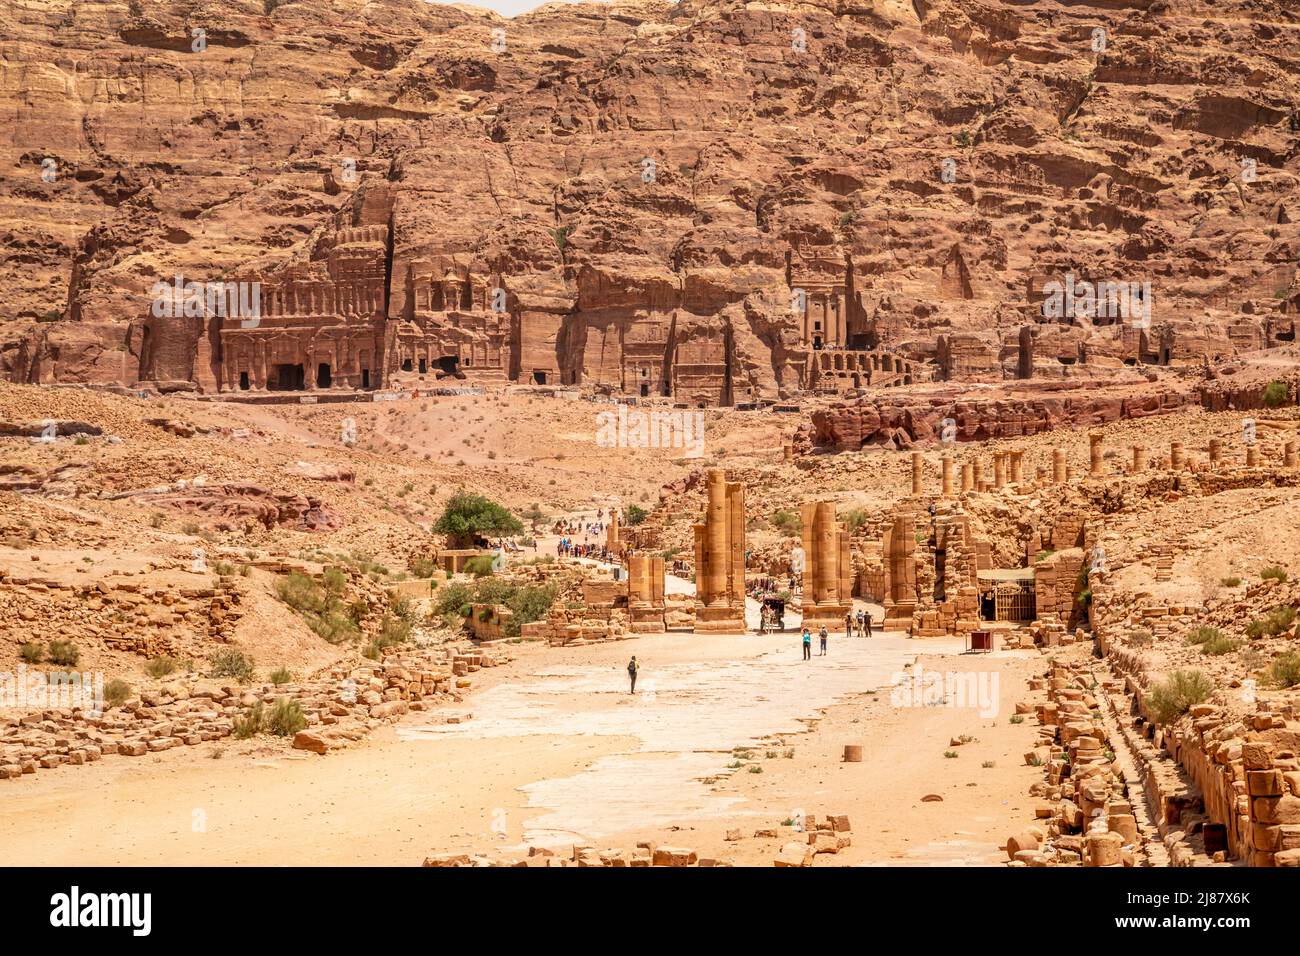 Petra main street with ancient Nabataean Royal tombs in the background and ruins of grand temple in the foreground, Petra, Jordan Stock Photo